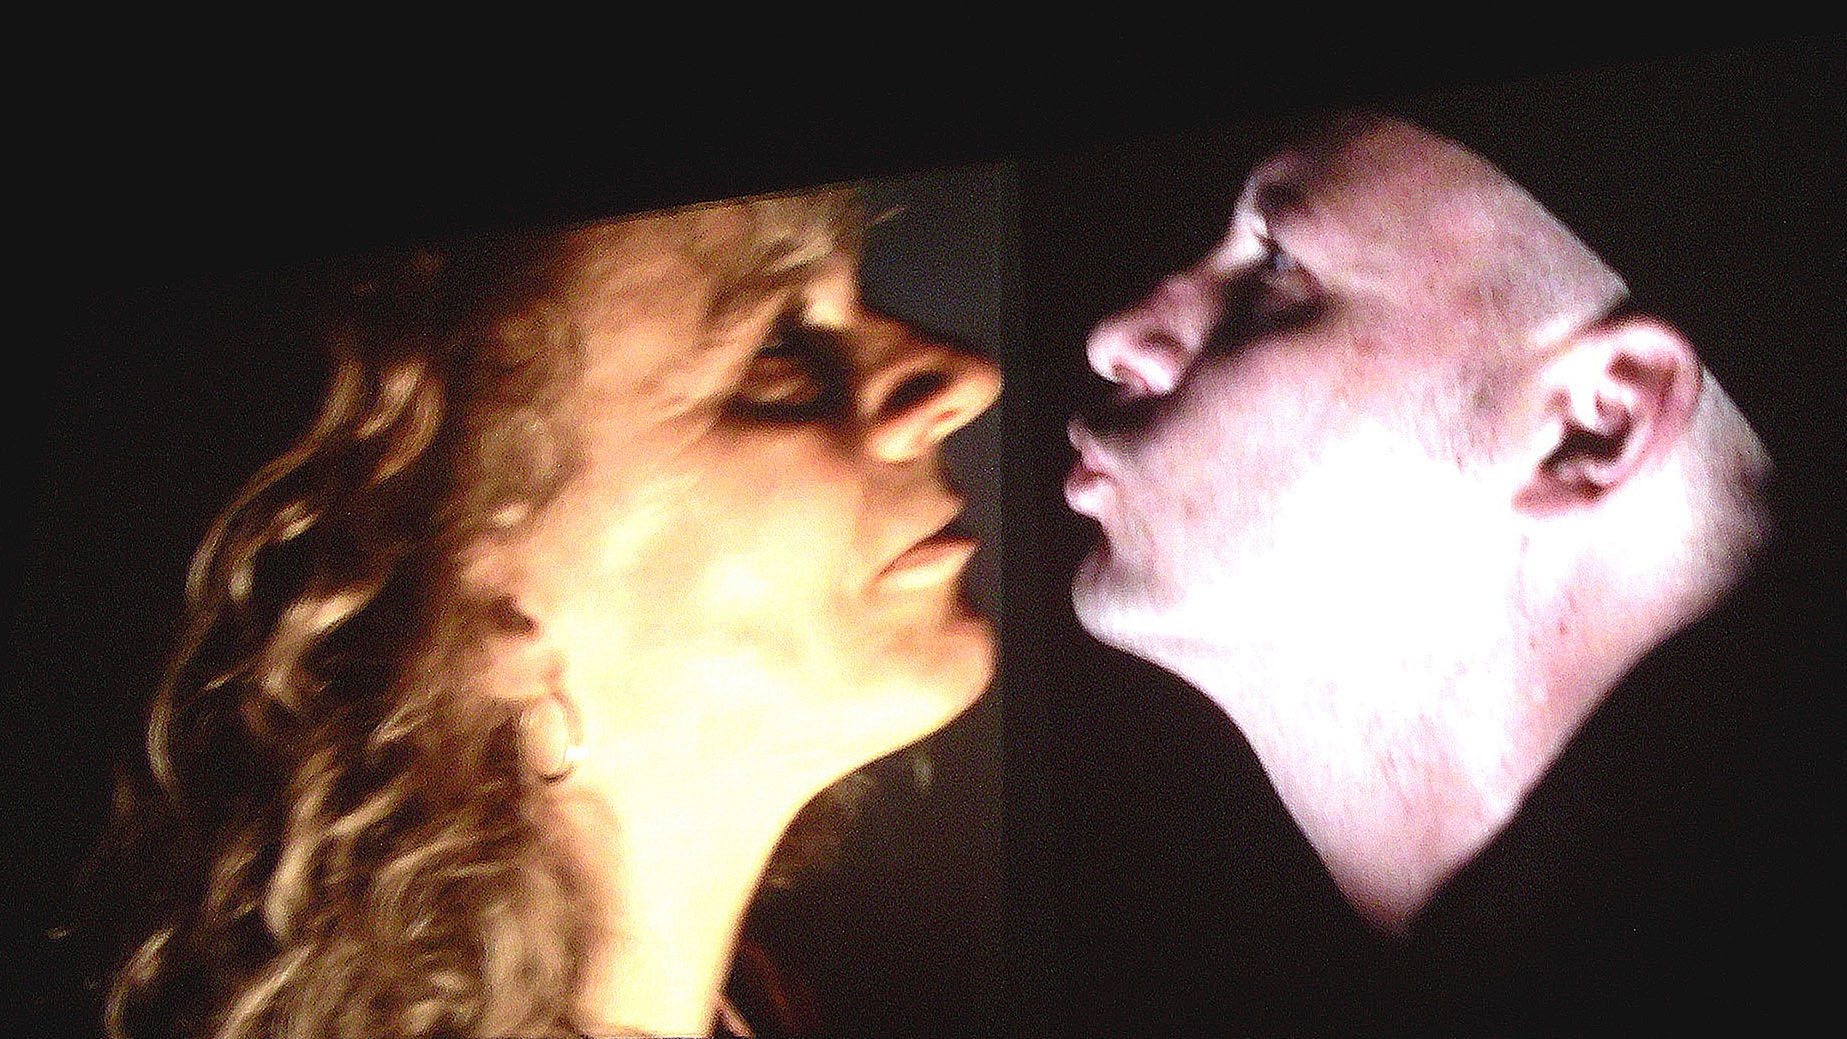 The Big Kiss, Telematic Installation, Over the Opening/Brooklyn, performed by Annie Abrahams & Mark RiverIf, Annie Abrahams (2007)